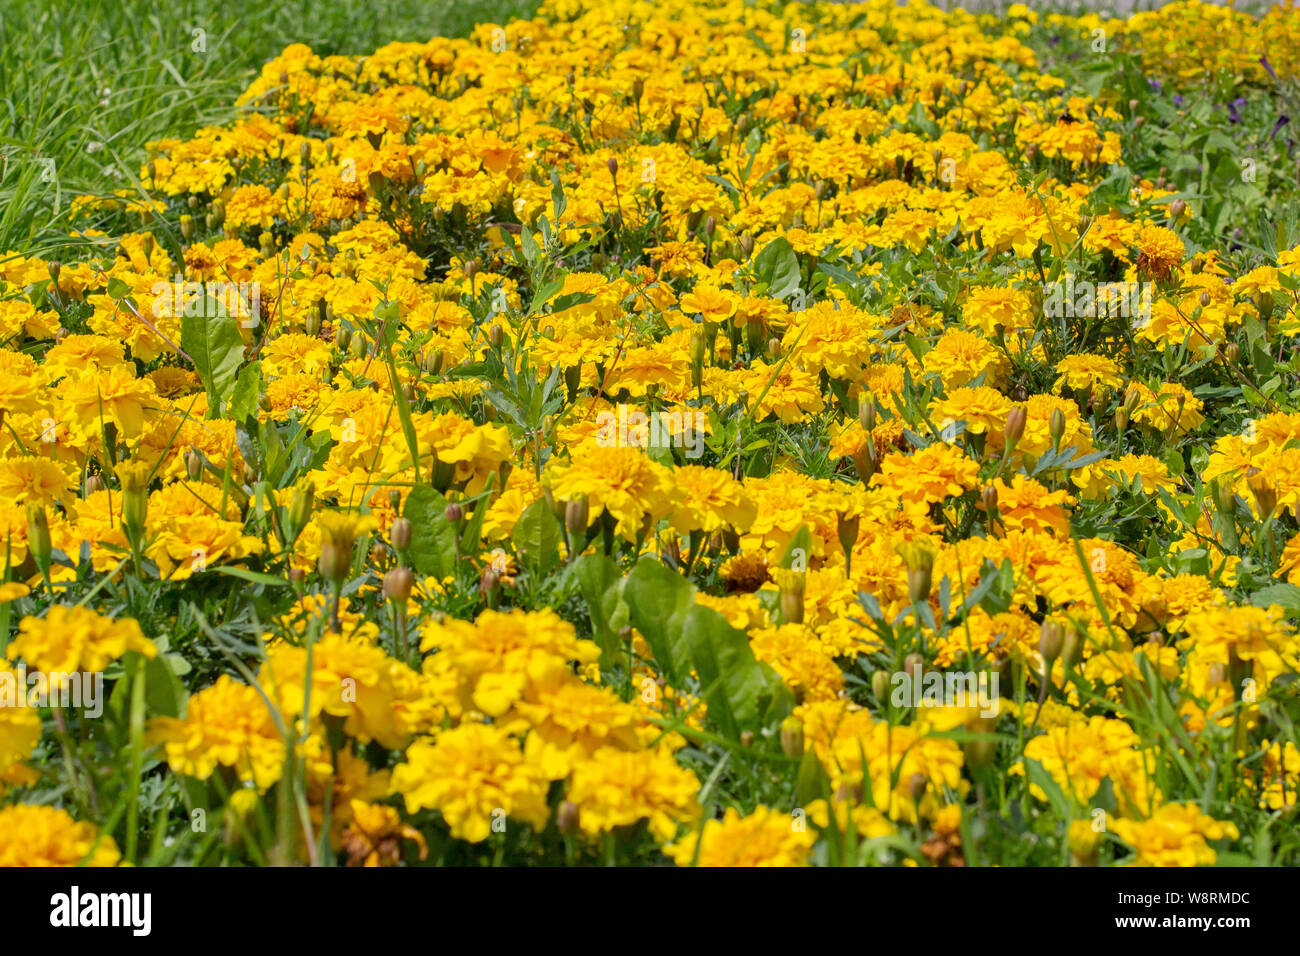 Tagetes is a genus of the sunflower family Asteraceae. Yellow flowers Tagete marigold on a flower bed in the park, decoration background wallpaper hor Stock Photo